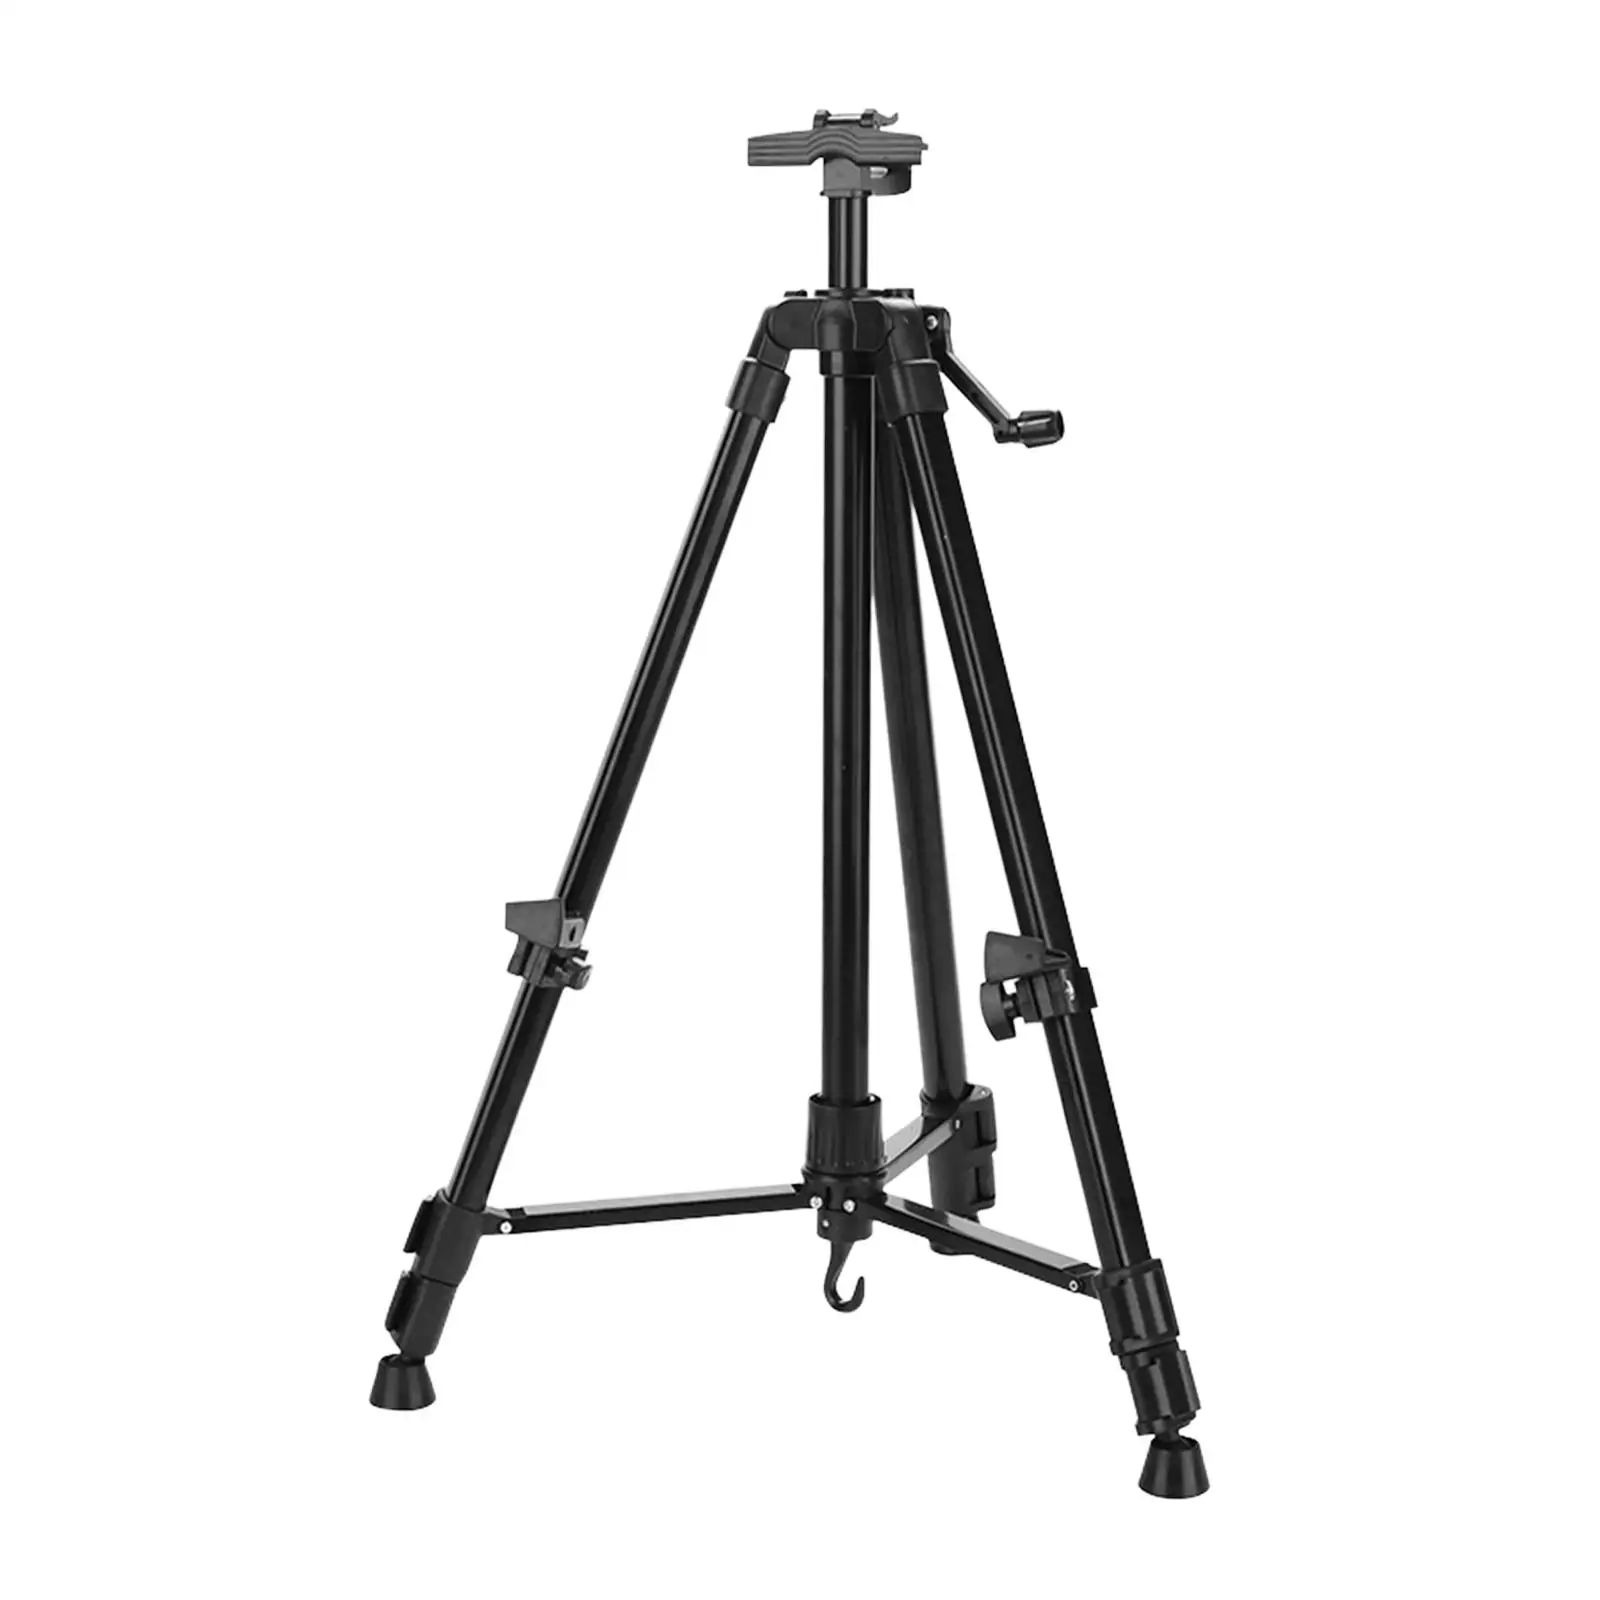 Easel Stand Artist Easel Aluminum Alloy Durable Professional for Drawing and Displaying Stable with Carrying Case 60 Inches Tall